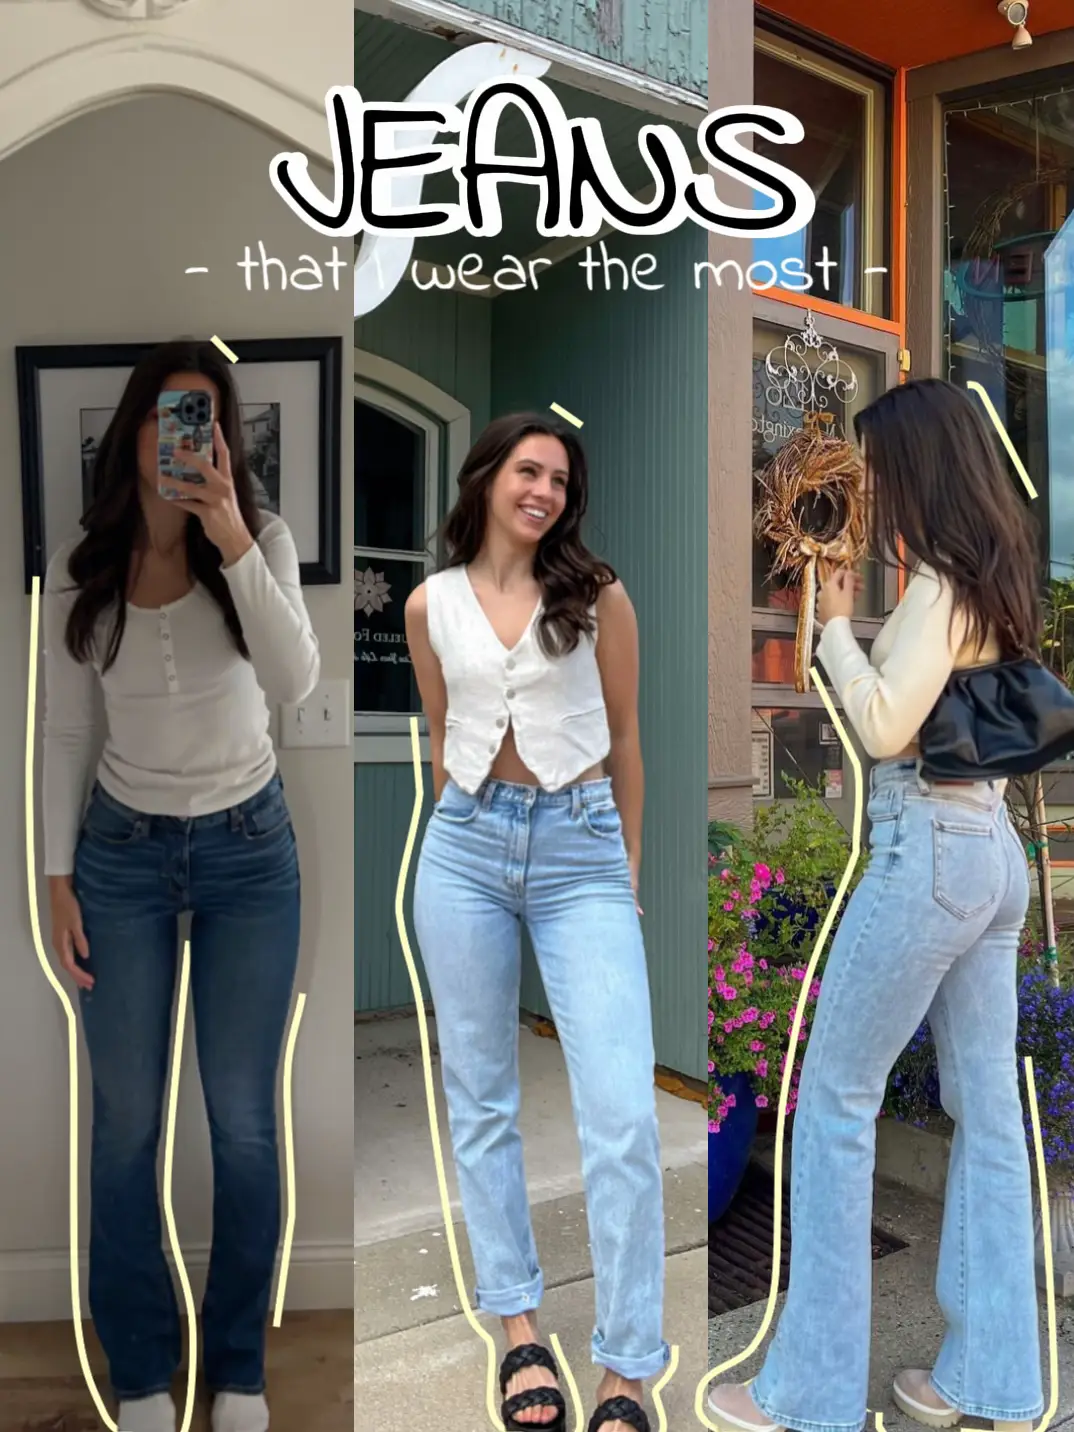 One Pair of Straight Leg Jeans: 20+ Outfit Ideas